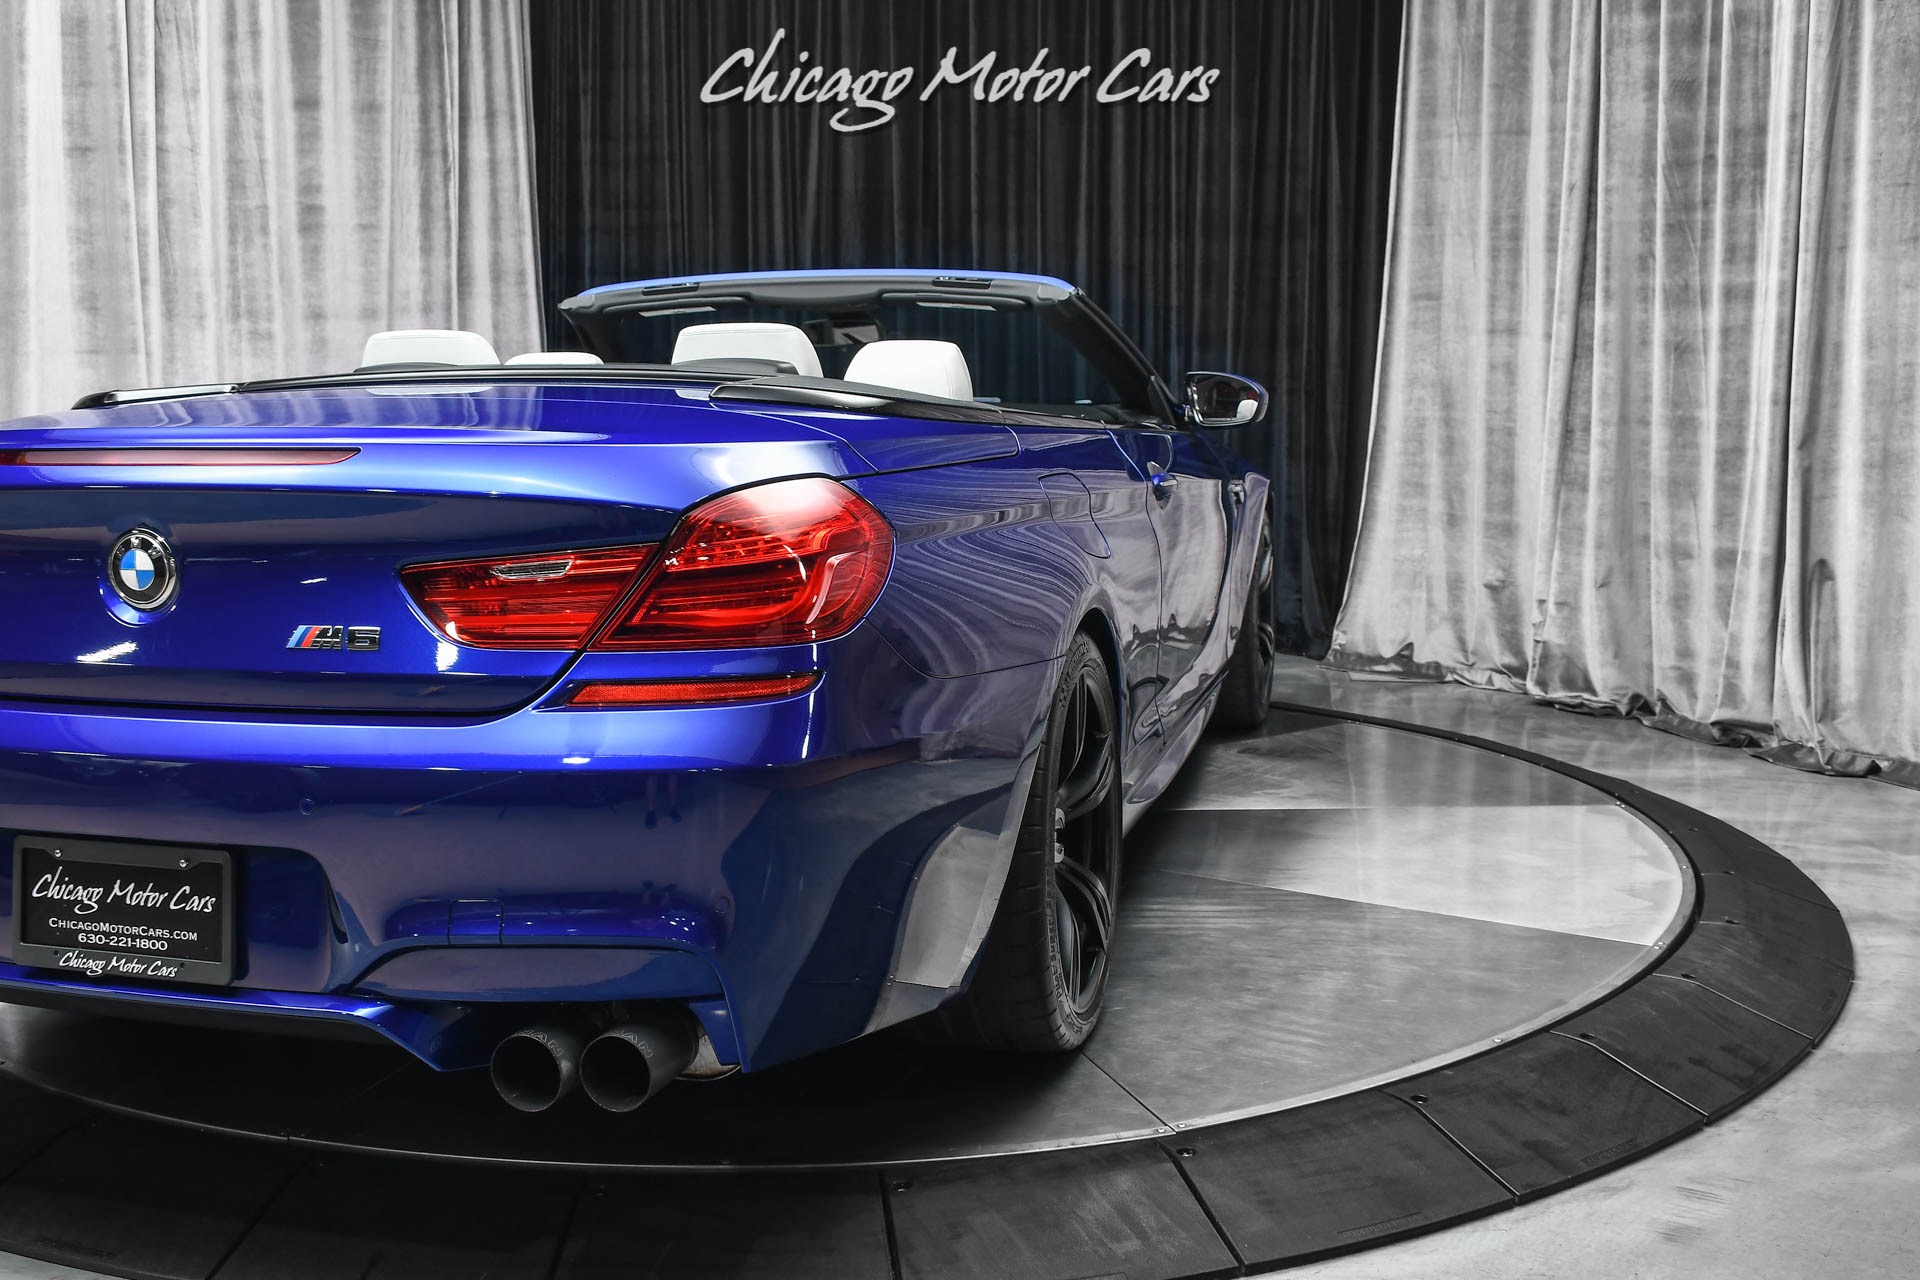 Used-2016-BMW-M6-Competition-Convertible-MSRP-138K-Dinan-Stage-1-Exhaust-Intake-and-Tune